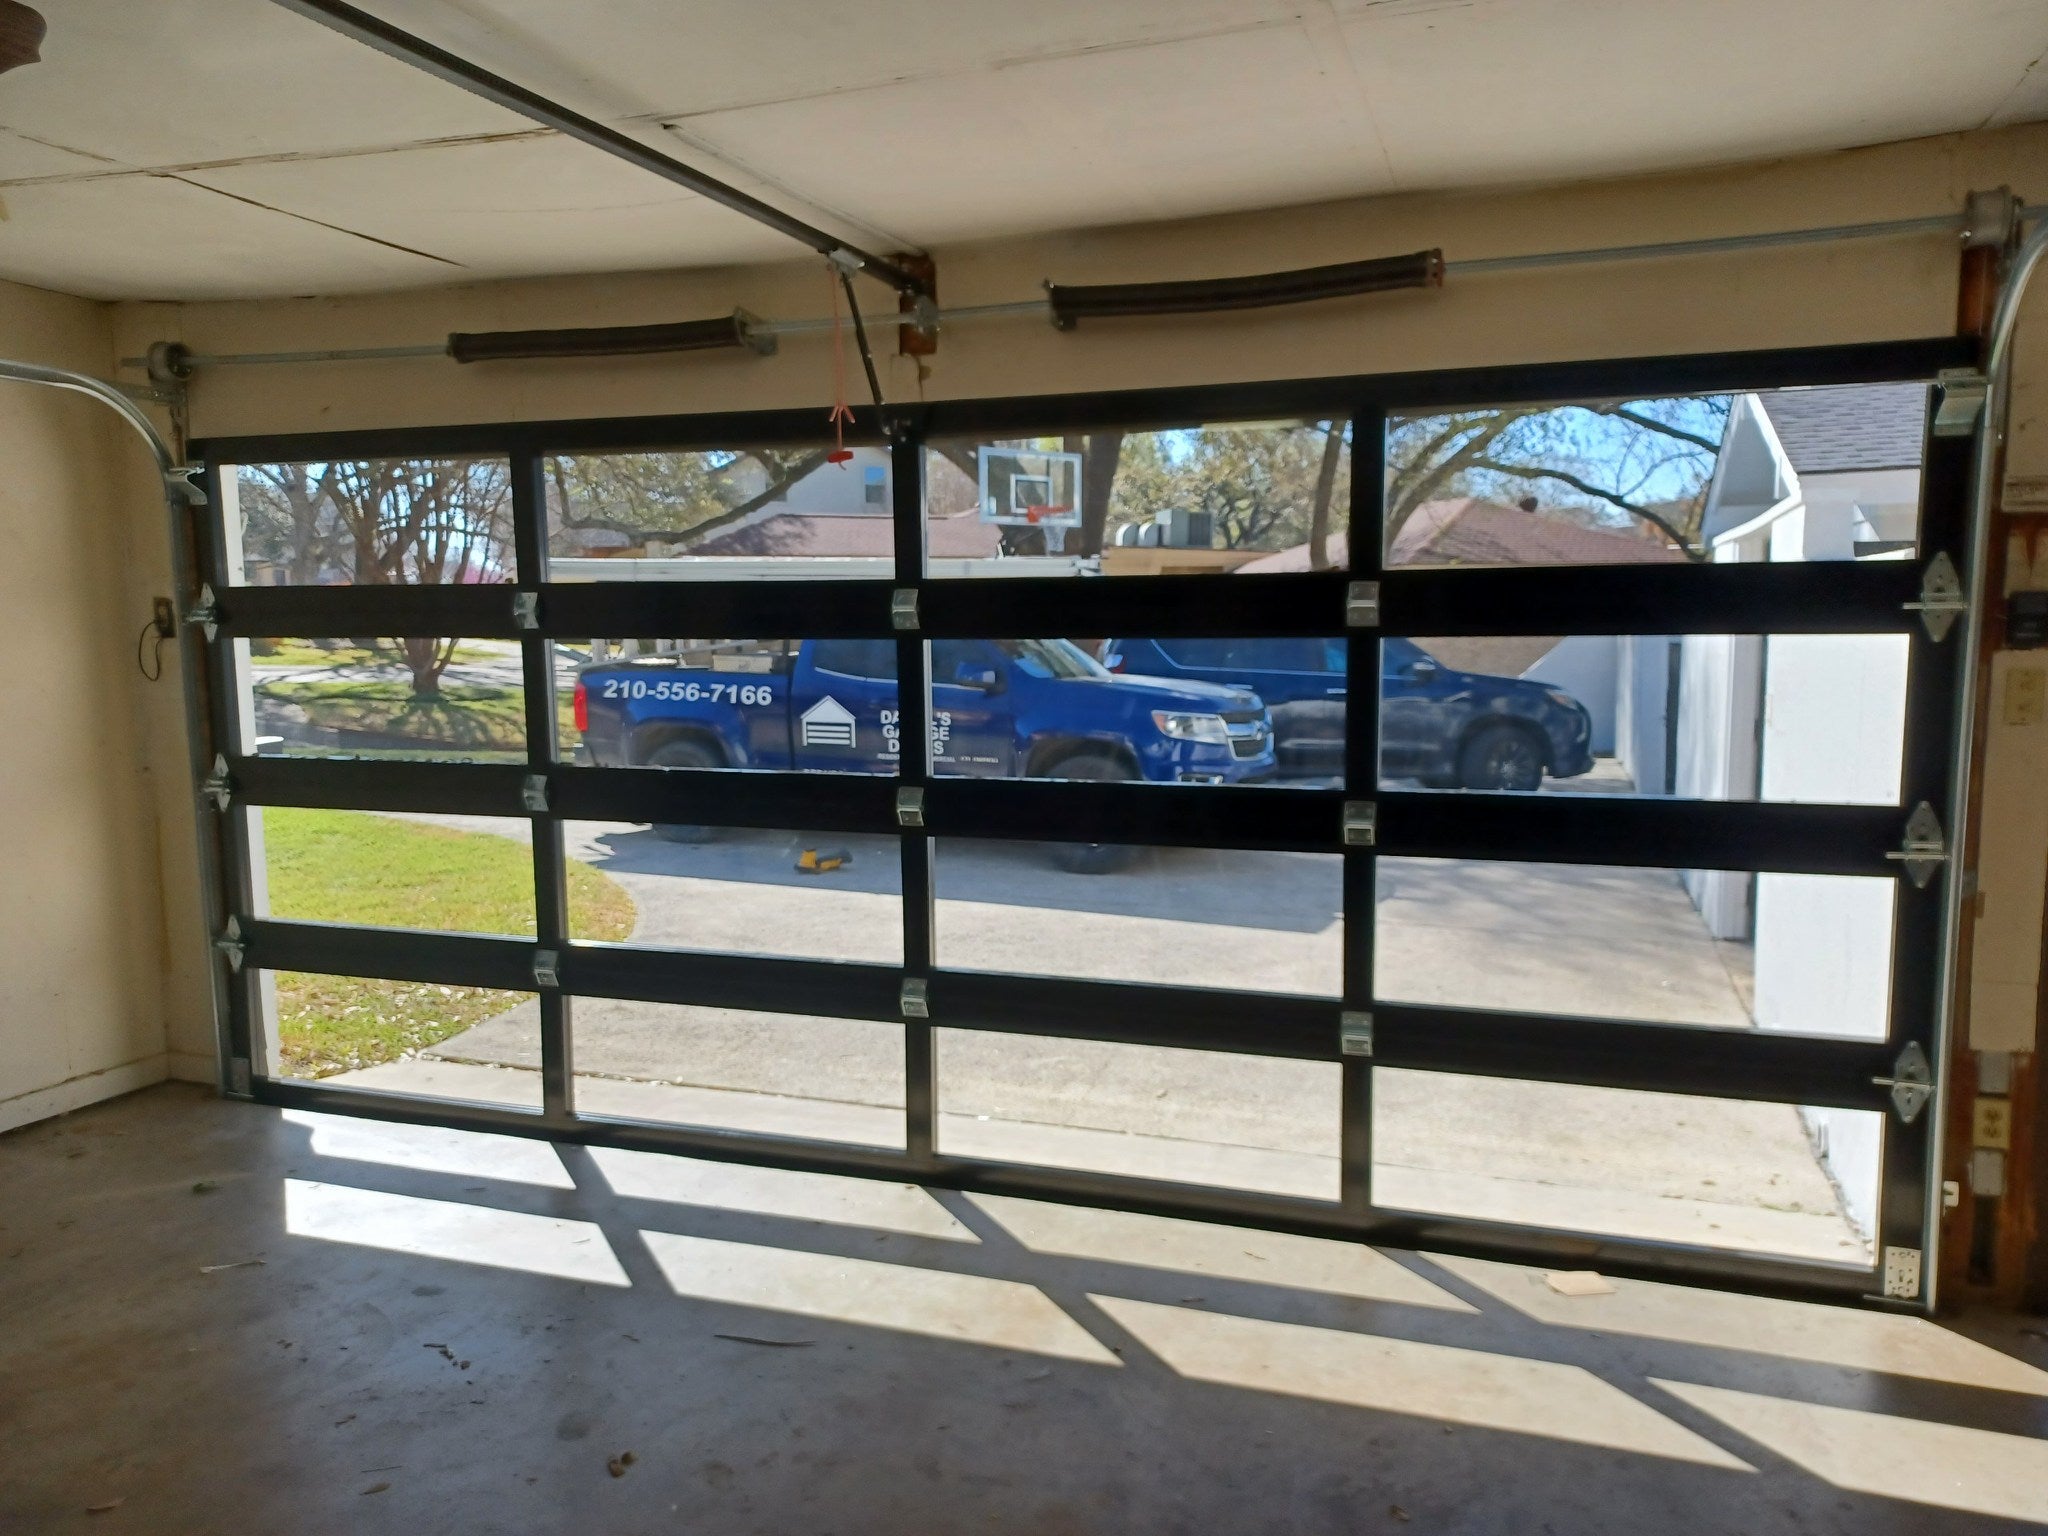 16 FT Wide By 10 FT Tall Full View Garage Door Matt Black Finish With Clear Glass